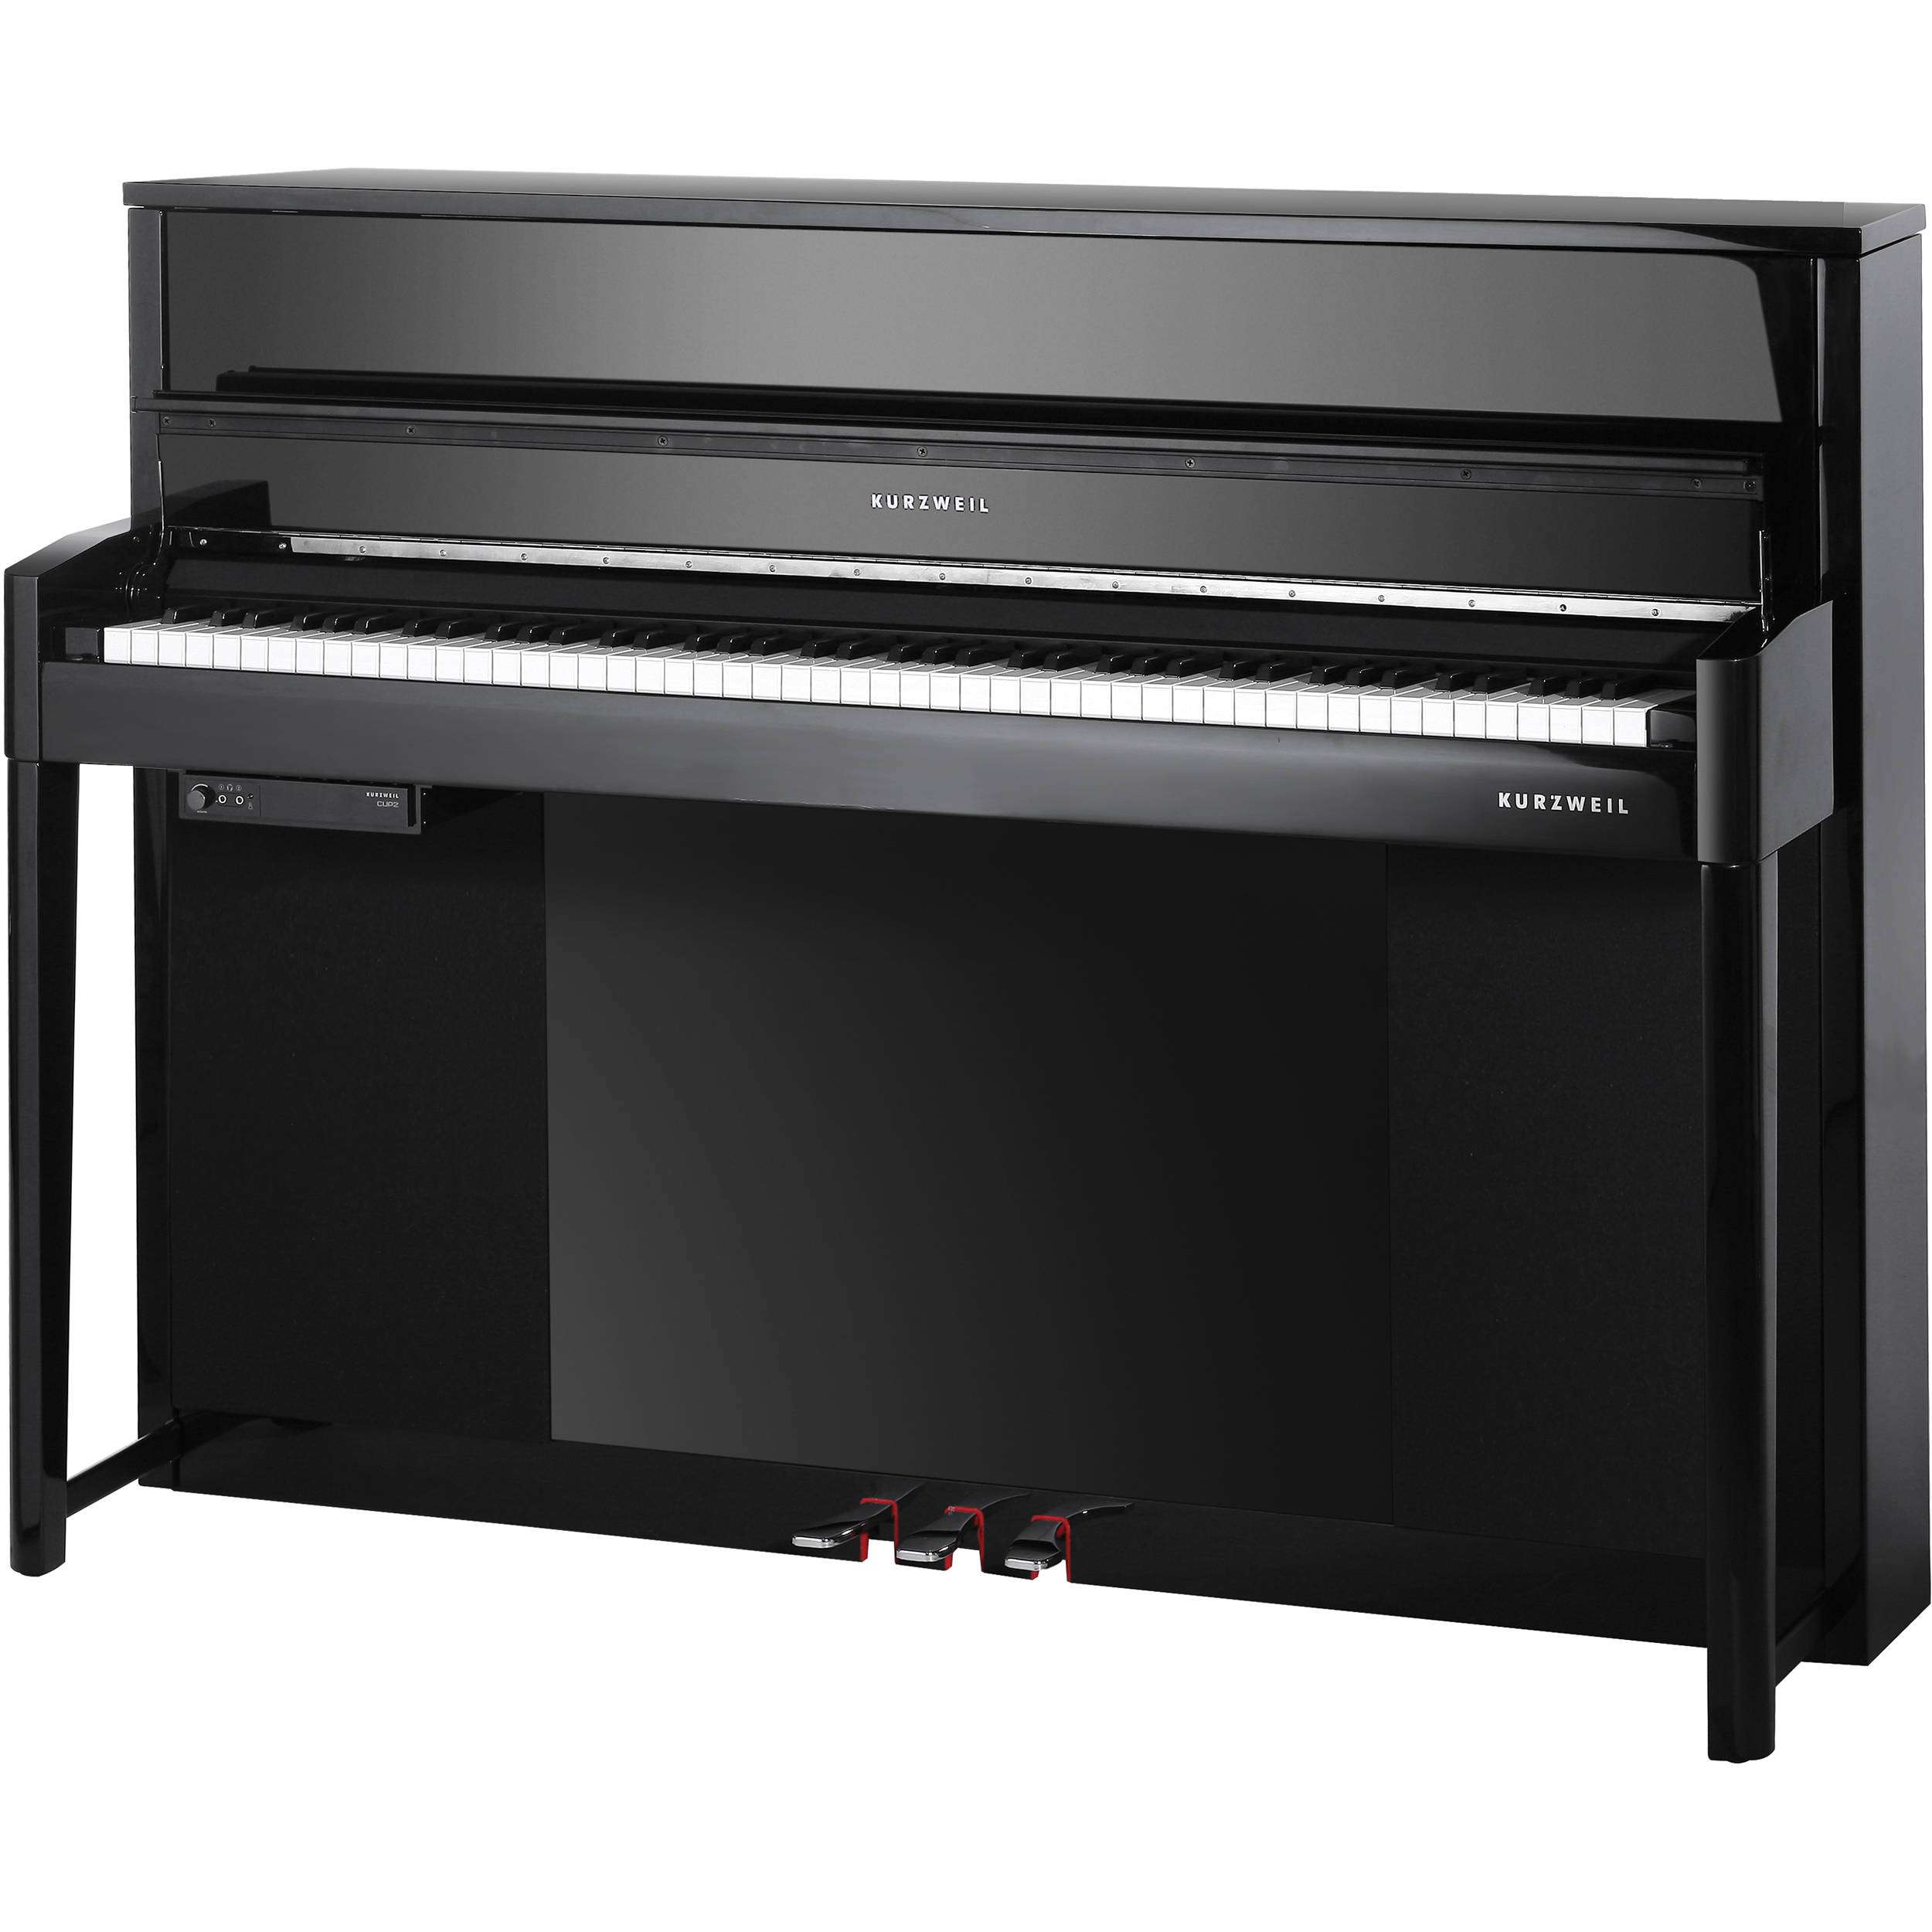 How to choose a digital piano for a child? Sound.